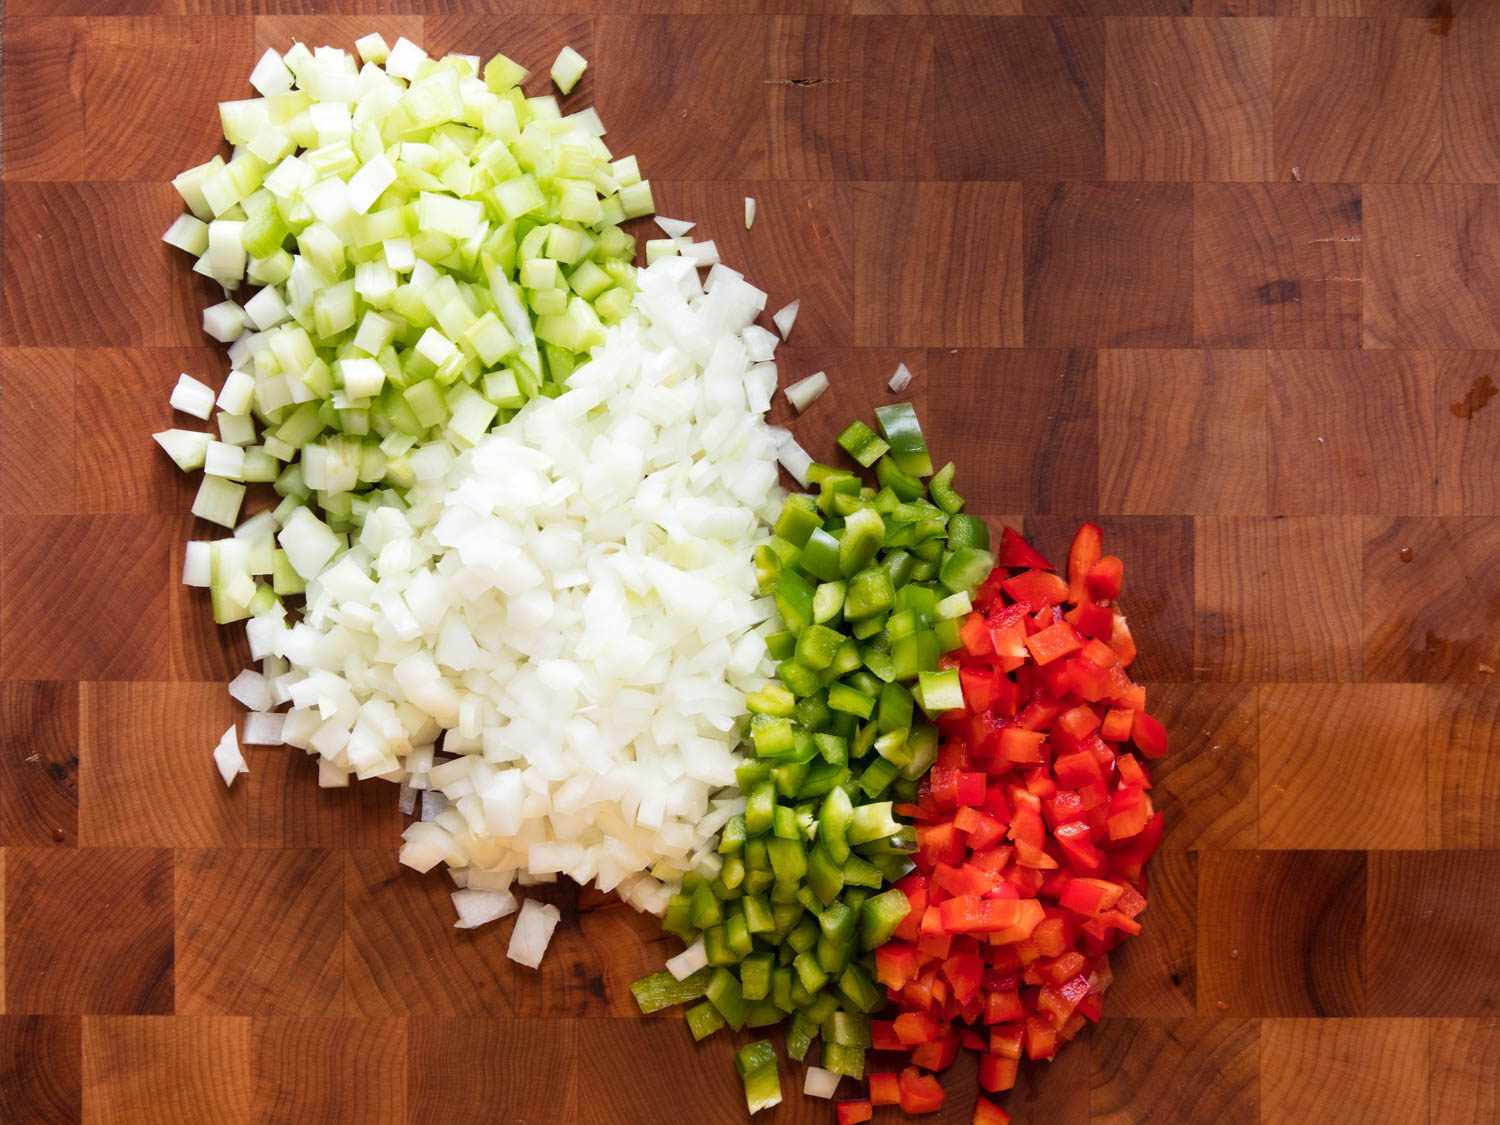 The holy trinity of Creole and Cajun cooking: diced onion, bell peppers, and celery.